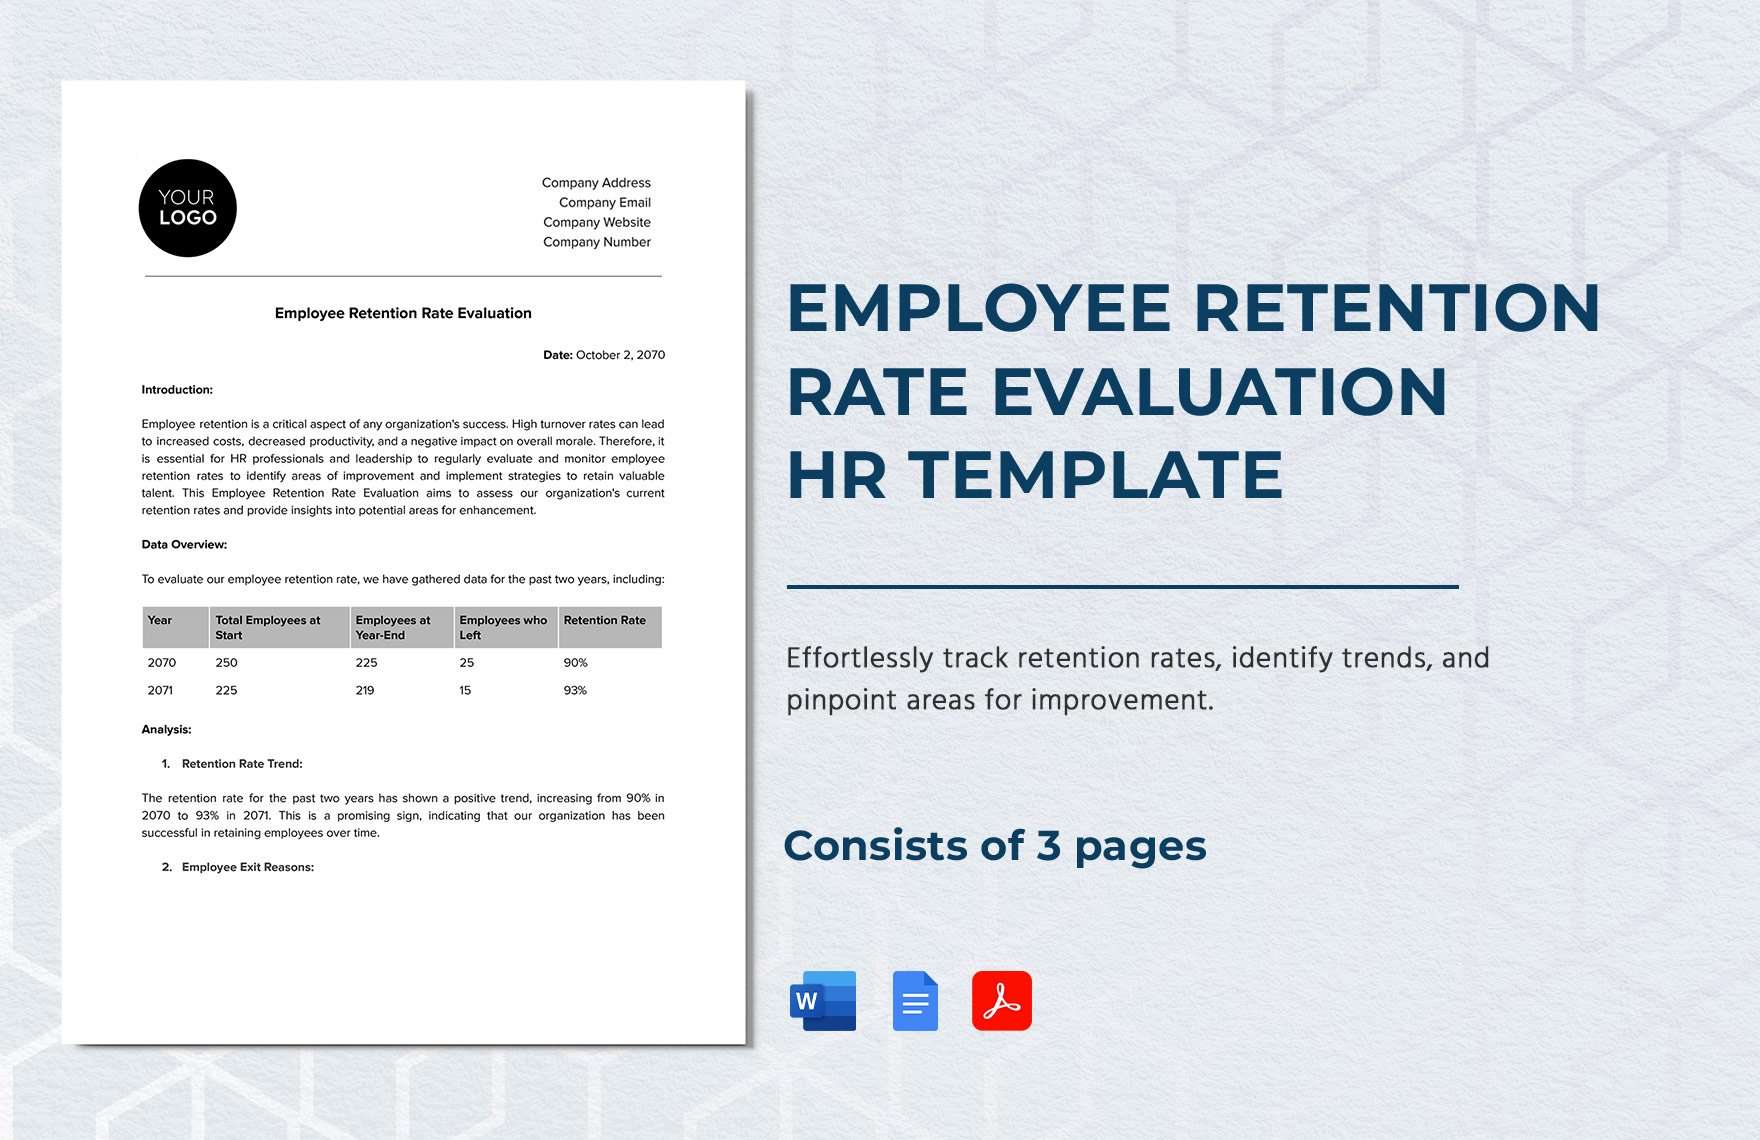 Employee Retention Rate Evaluation HR Template in Word, Google Docs, PDF